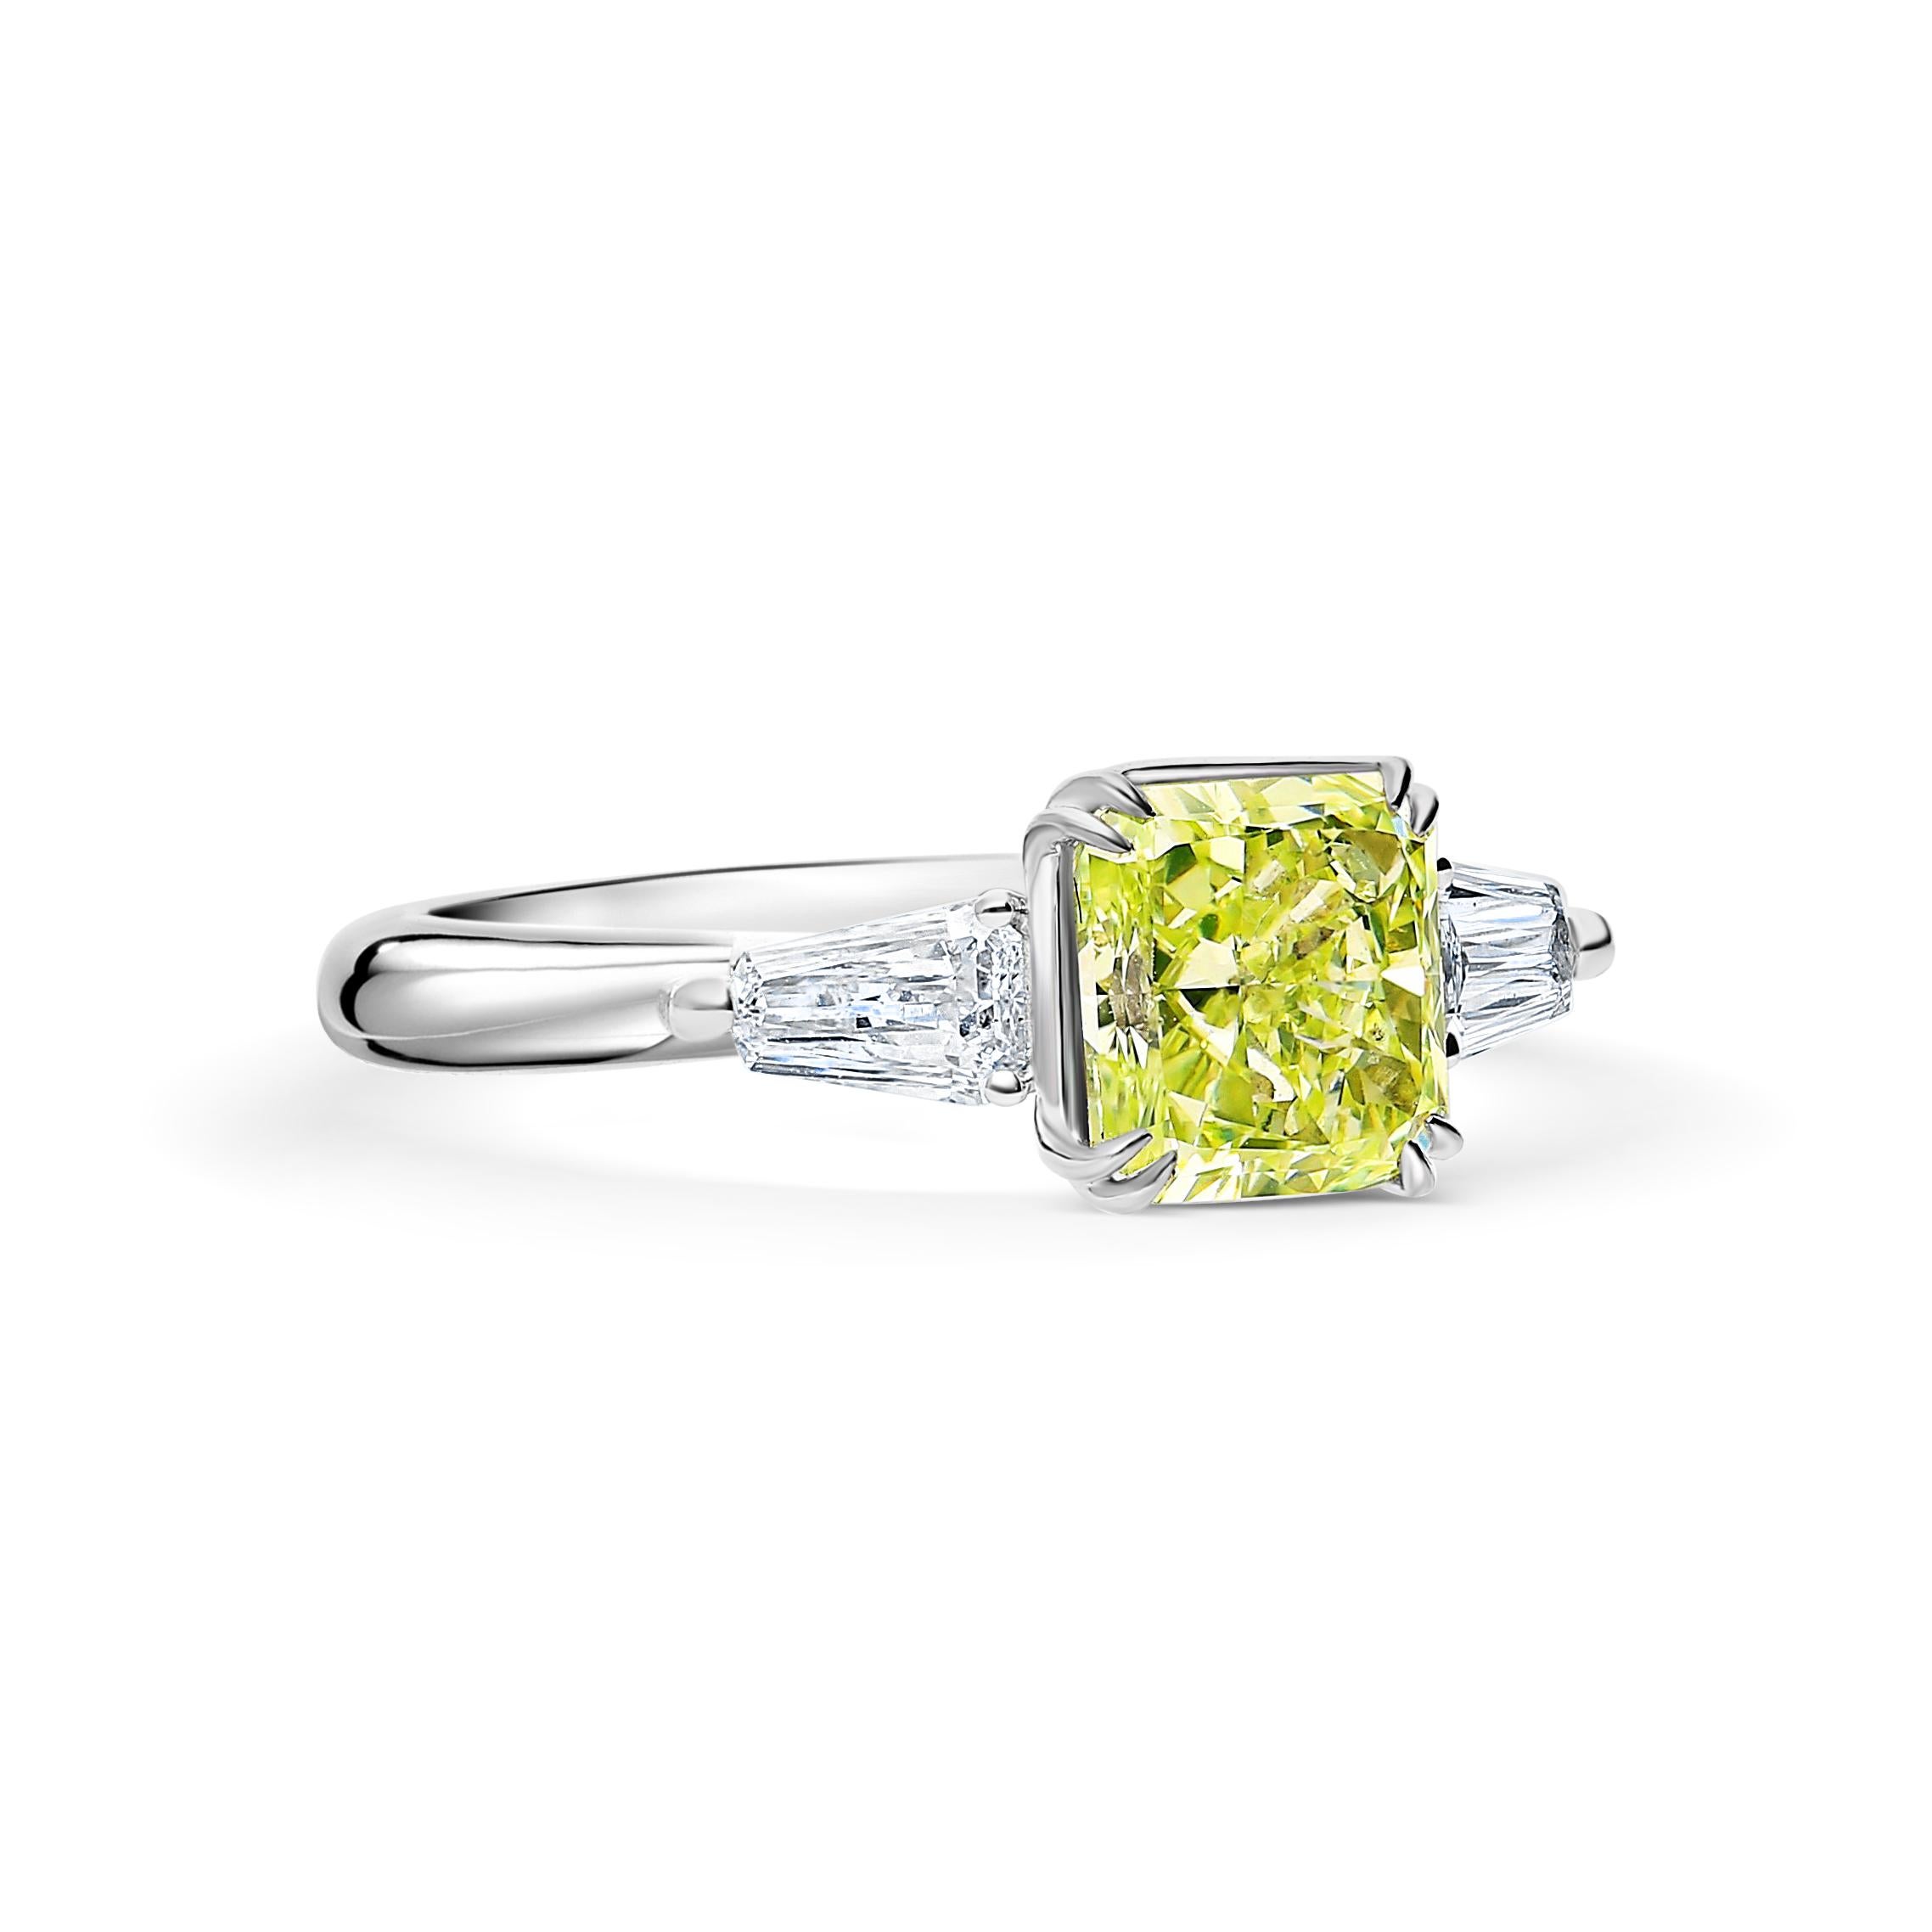 GIA certified 2.22 carat fancy yellow-green radiant cut diamond three-stone ring. Featuring two flawless tapered baguette-cut diamonds. The center stone is a certified Fancy Yellow-Green, meaning that the predominant color displayed is green, with